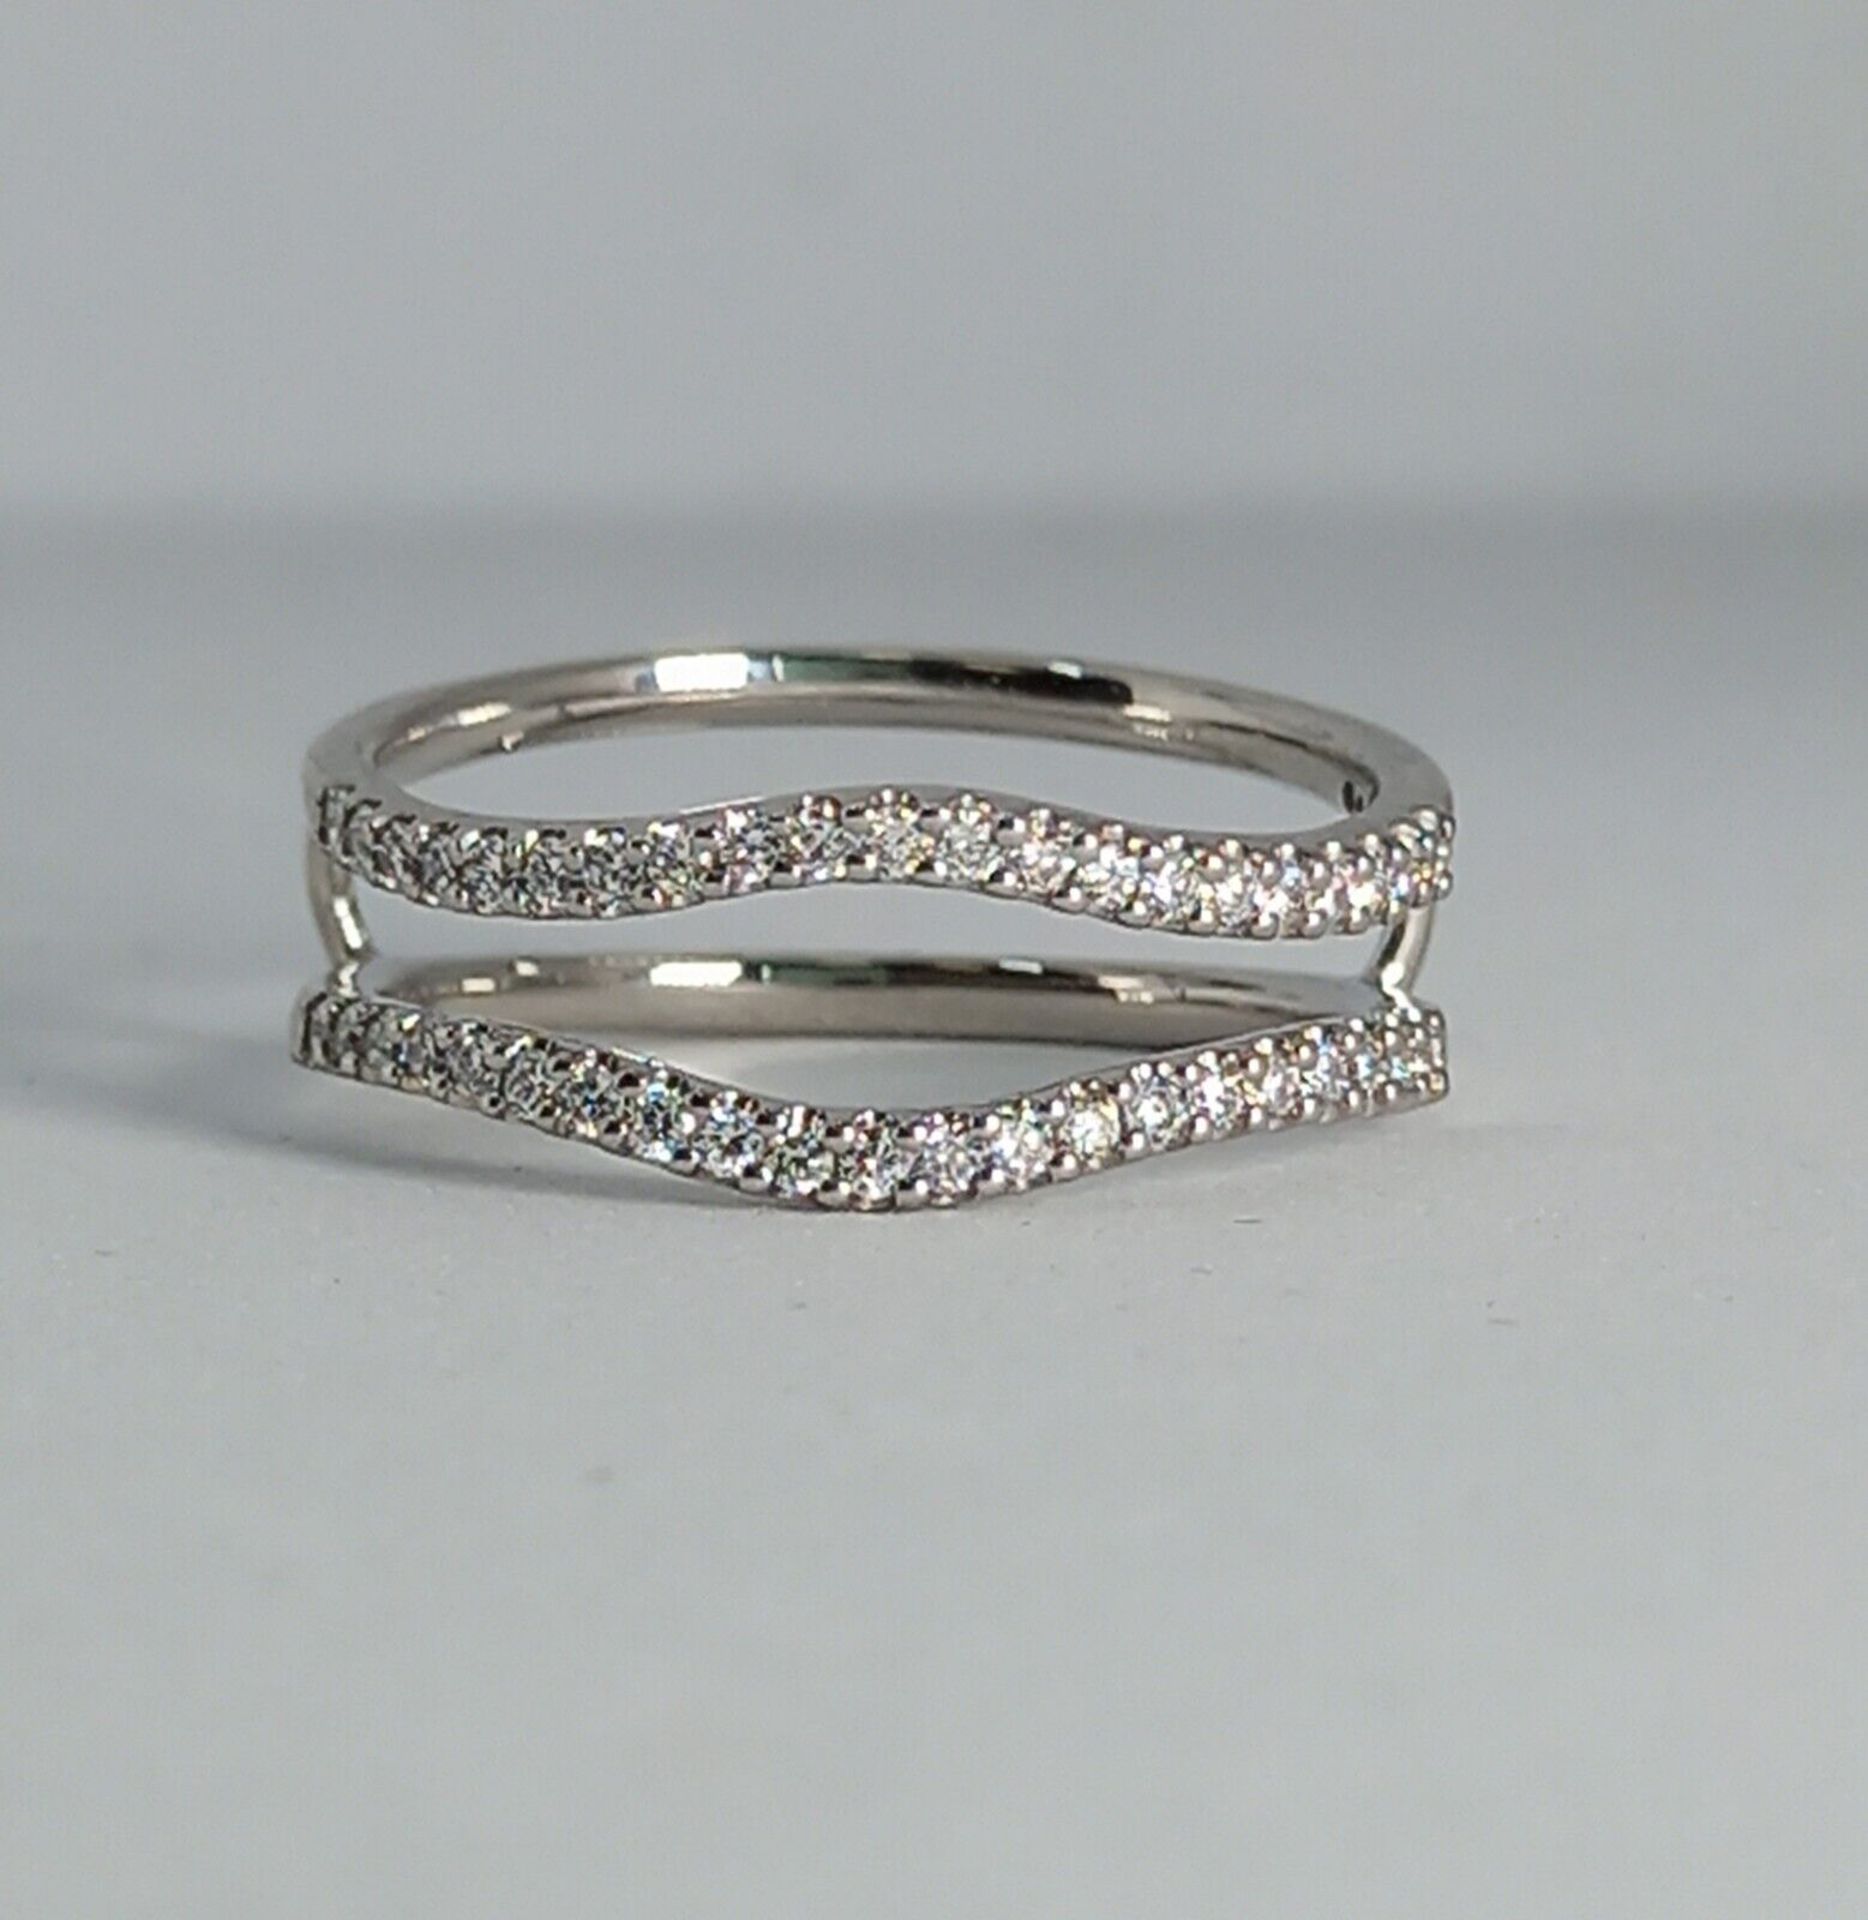 TWIN ROW DIAMOND PLATINUM WEDDING BAND/WHITE GOLD IN GIFT BOX WITH VALUATION CERTIFICATE OF £2995 - Image 2 of 3